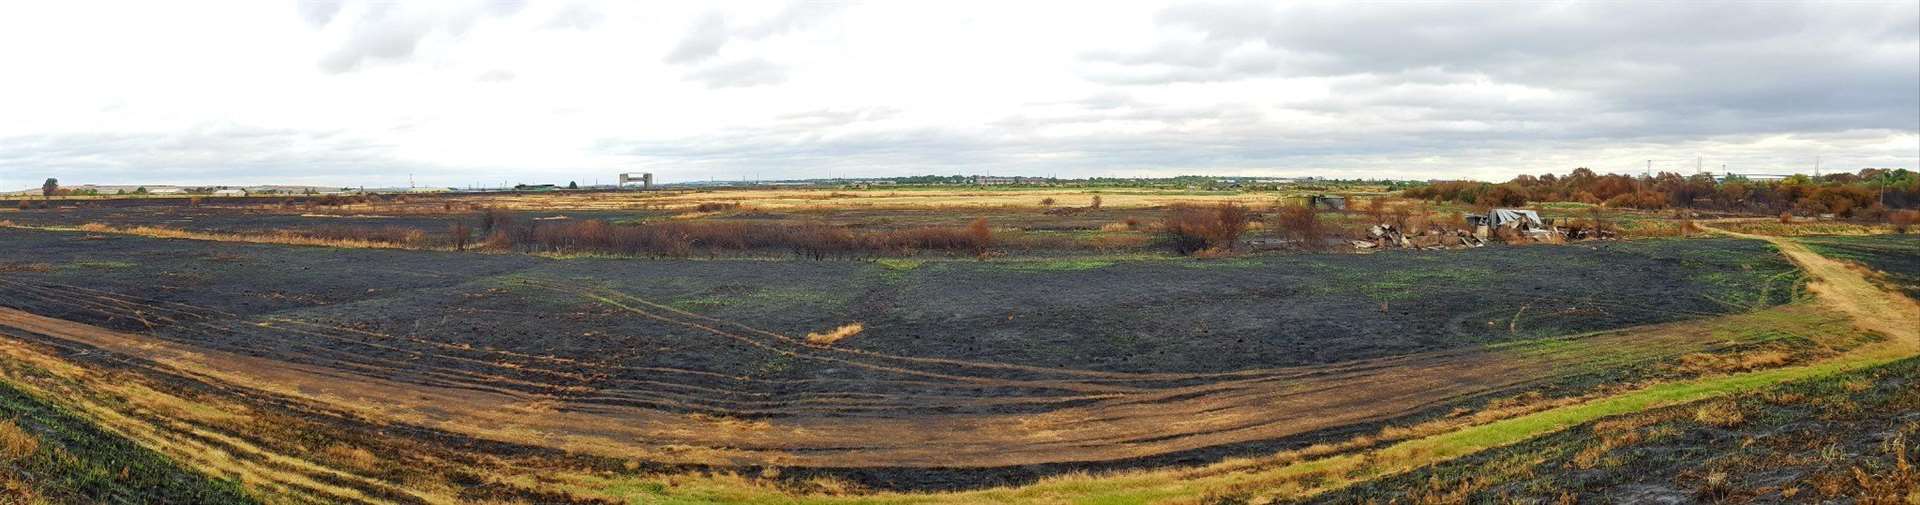 Much of the Dartford marshes have been blackened by fire.  Images: Matt Thomas